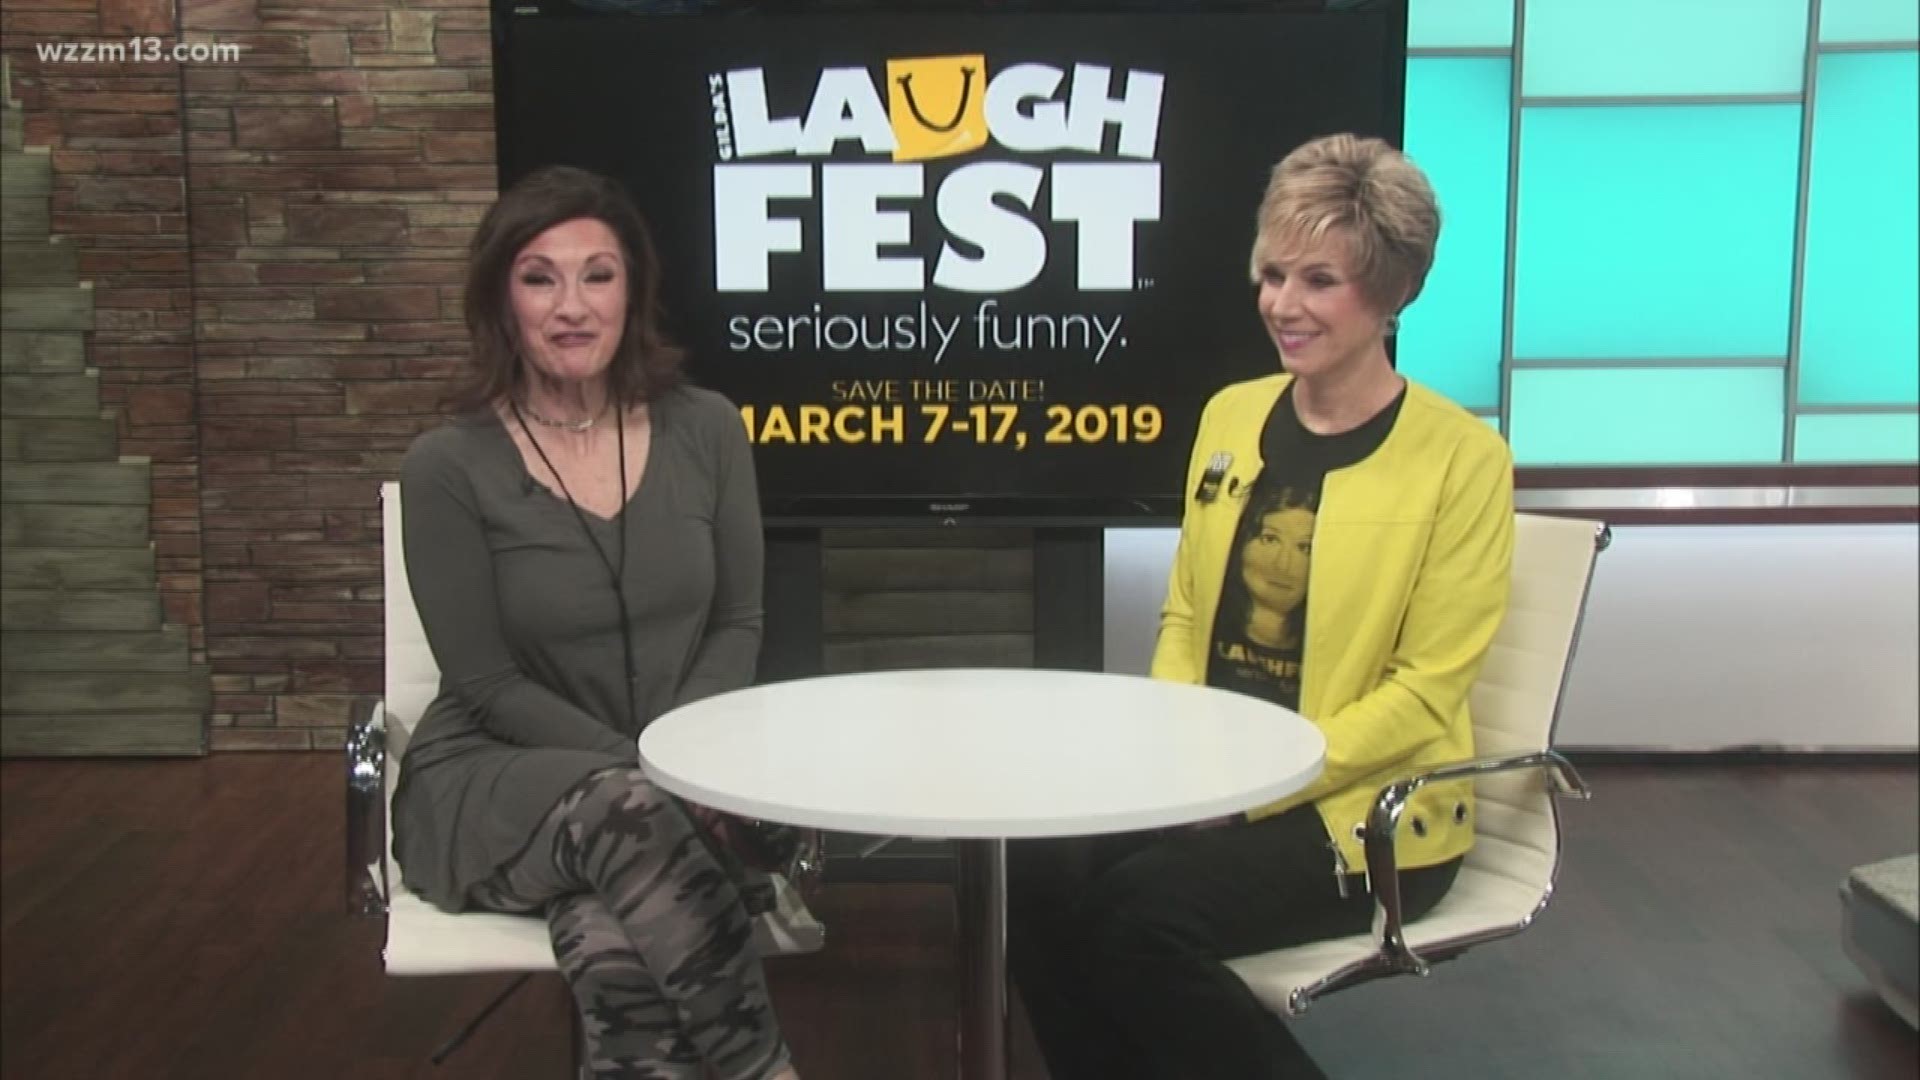 Laughfest